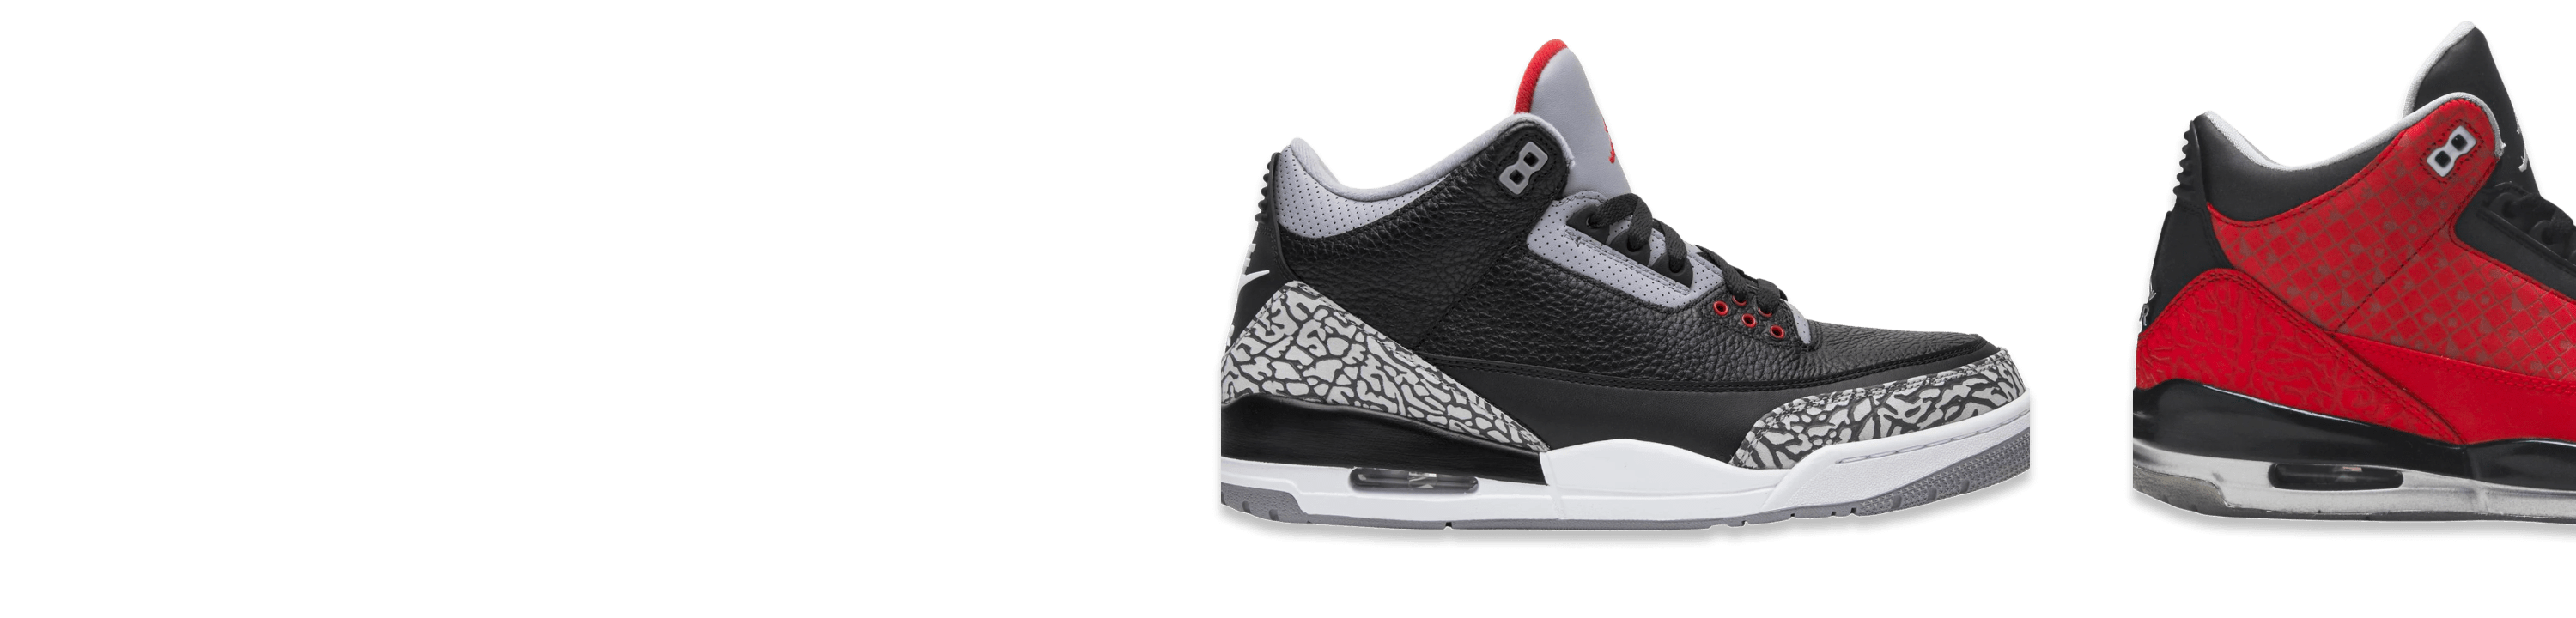 J Balvin Gives DJ Khaled Only Pair Of Unreleased Air Jordan 3s Off